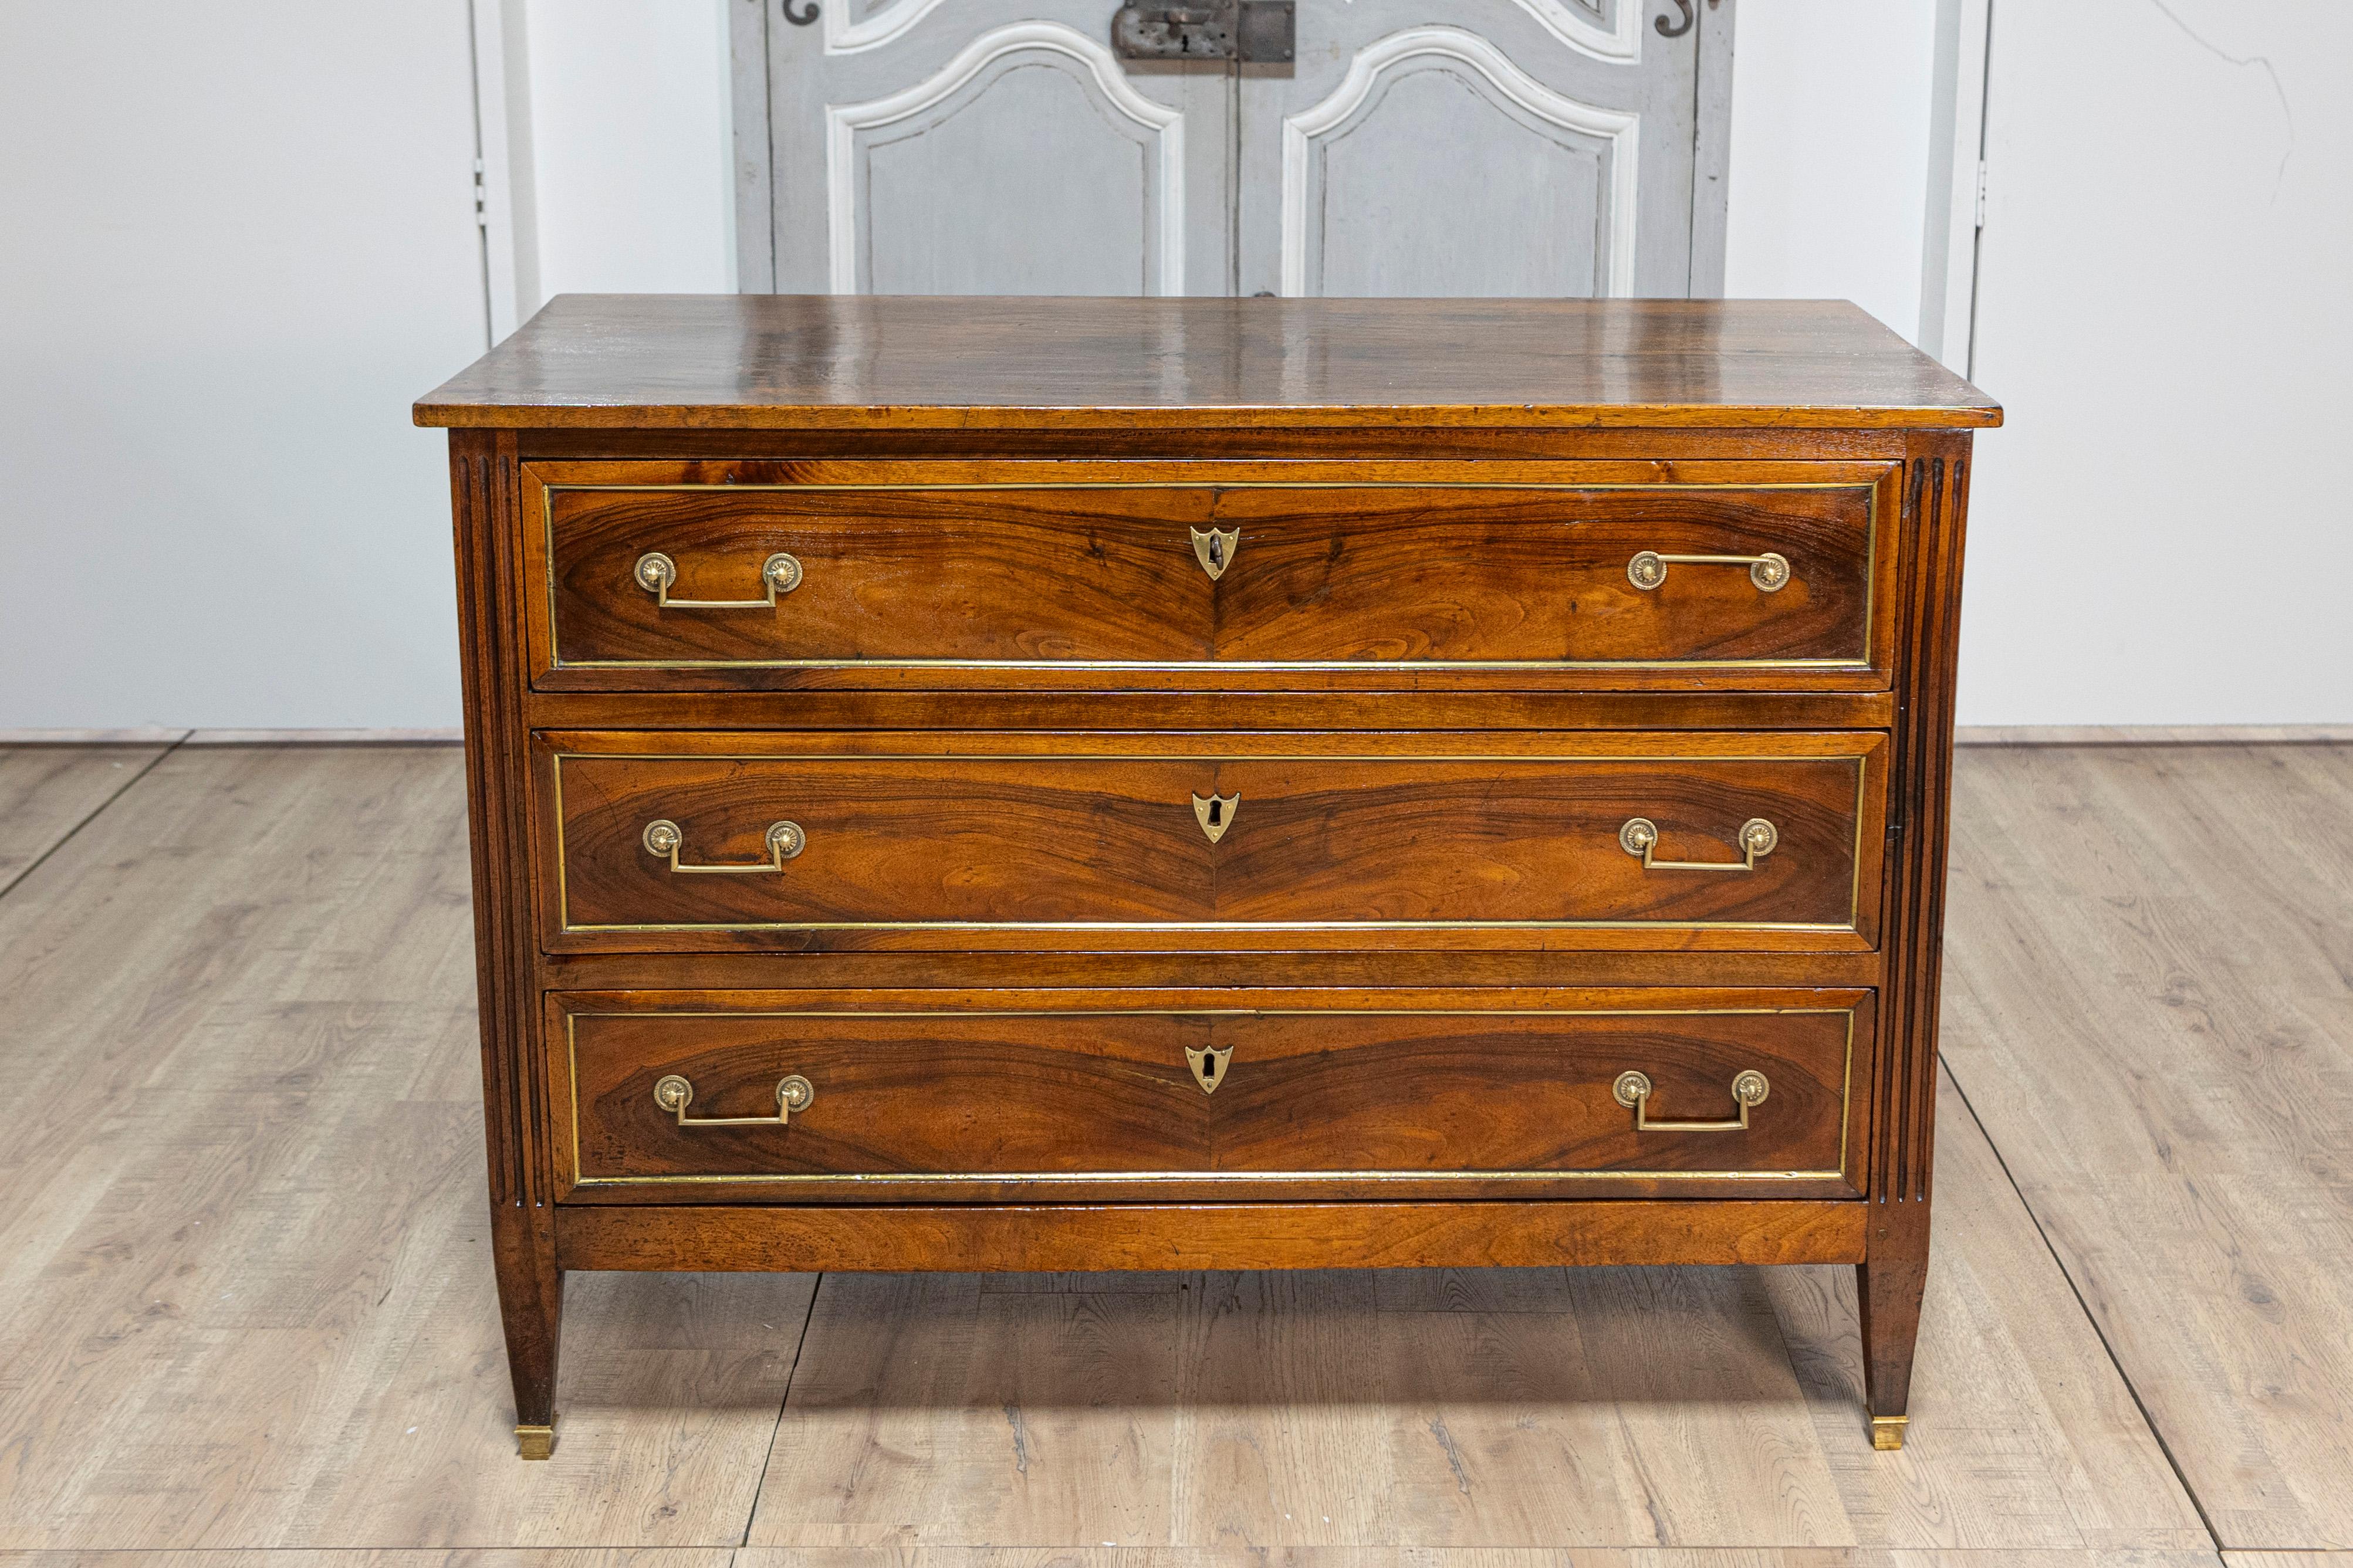 An Italian Louis XVI period walnut commode from the late 18th century, with three drawers, brass trim, fluted side posts and tapered legs. This exquisite Italian Louis XVI period walnut commode from the late 18th century exudes elegance and refined